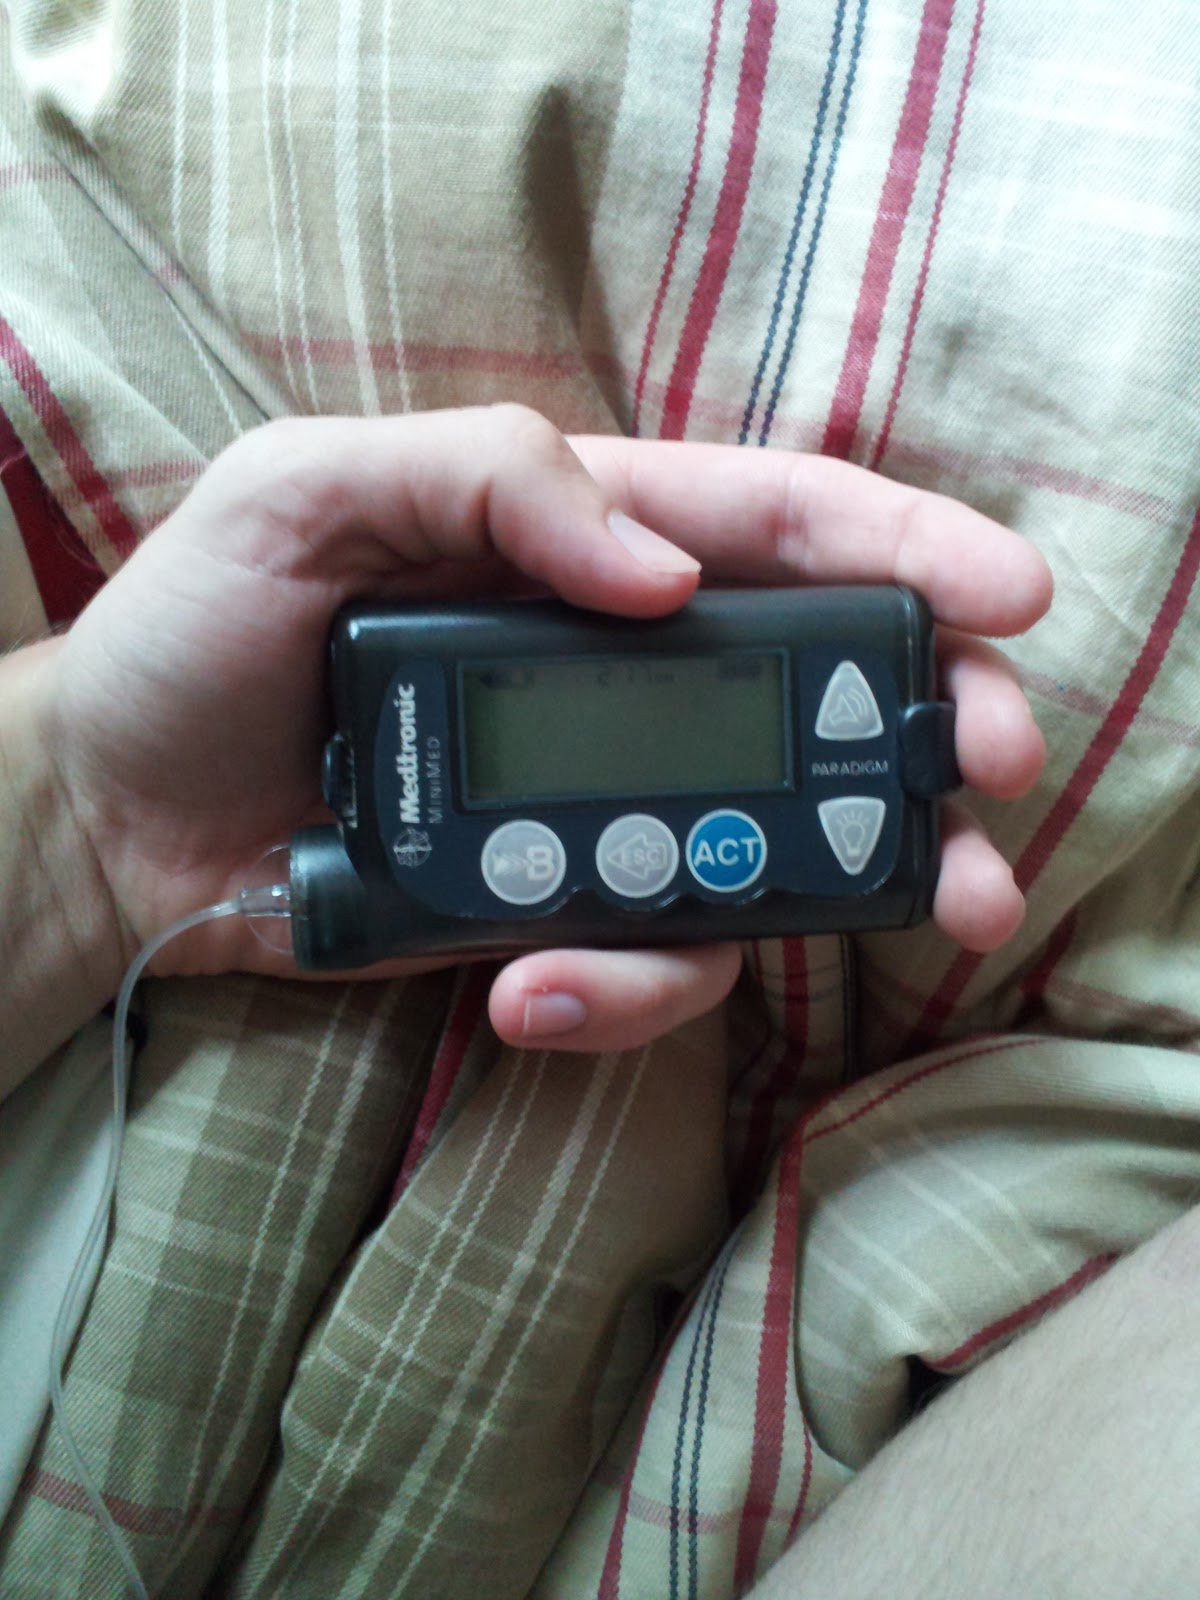 Living With Diabetes: I Go on the Insulin Pump